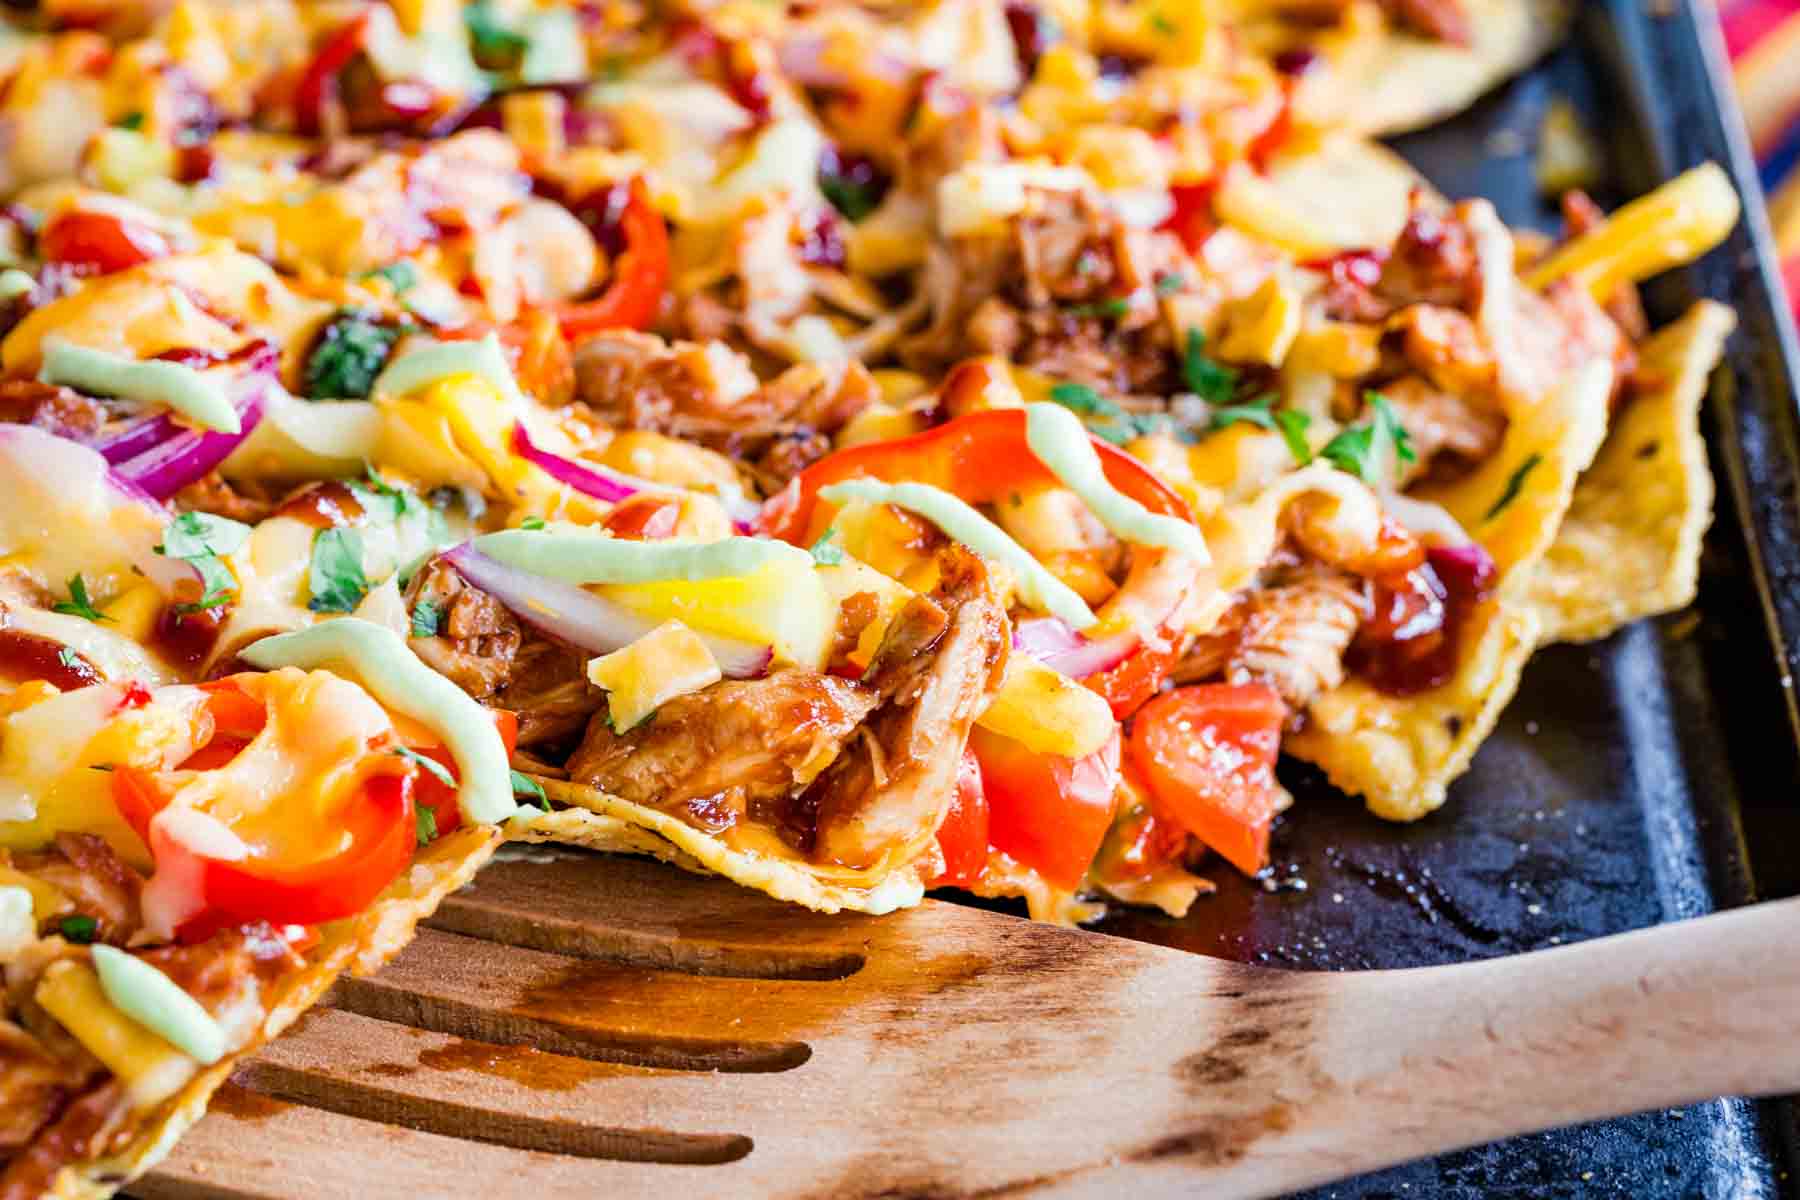 A wooden spatula picking up some of the nachos on a sheet pan.